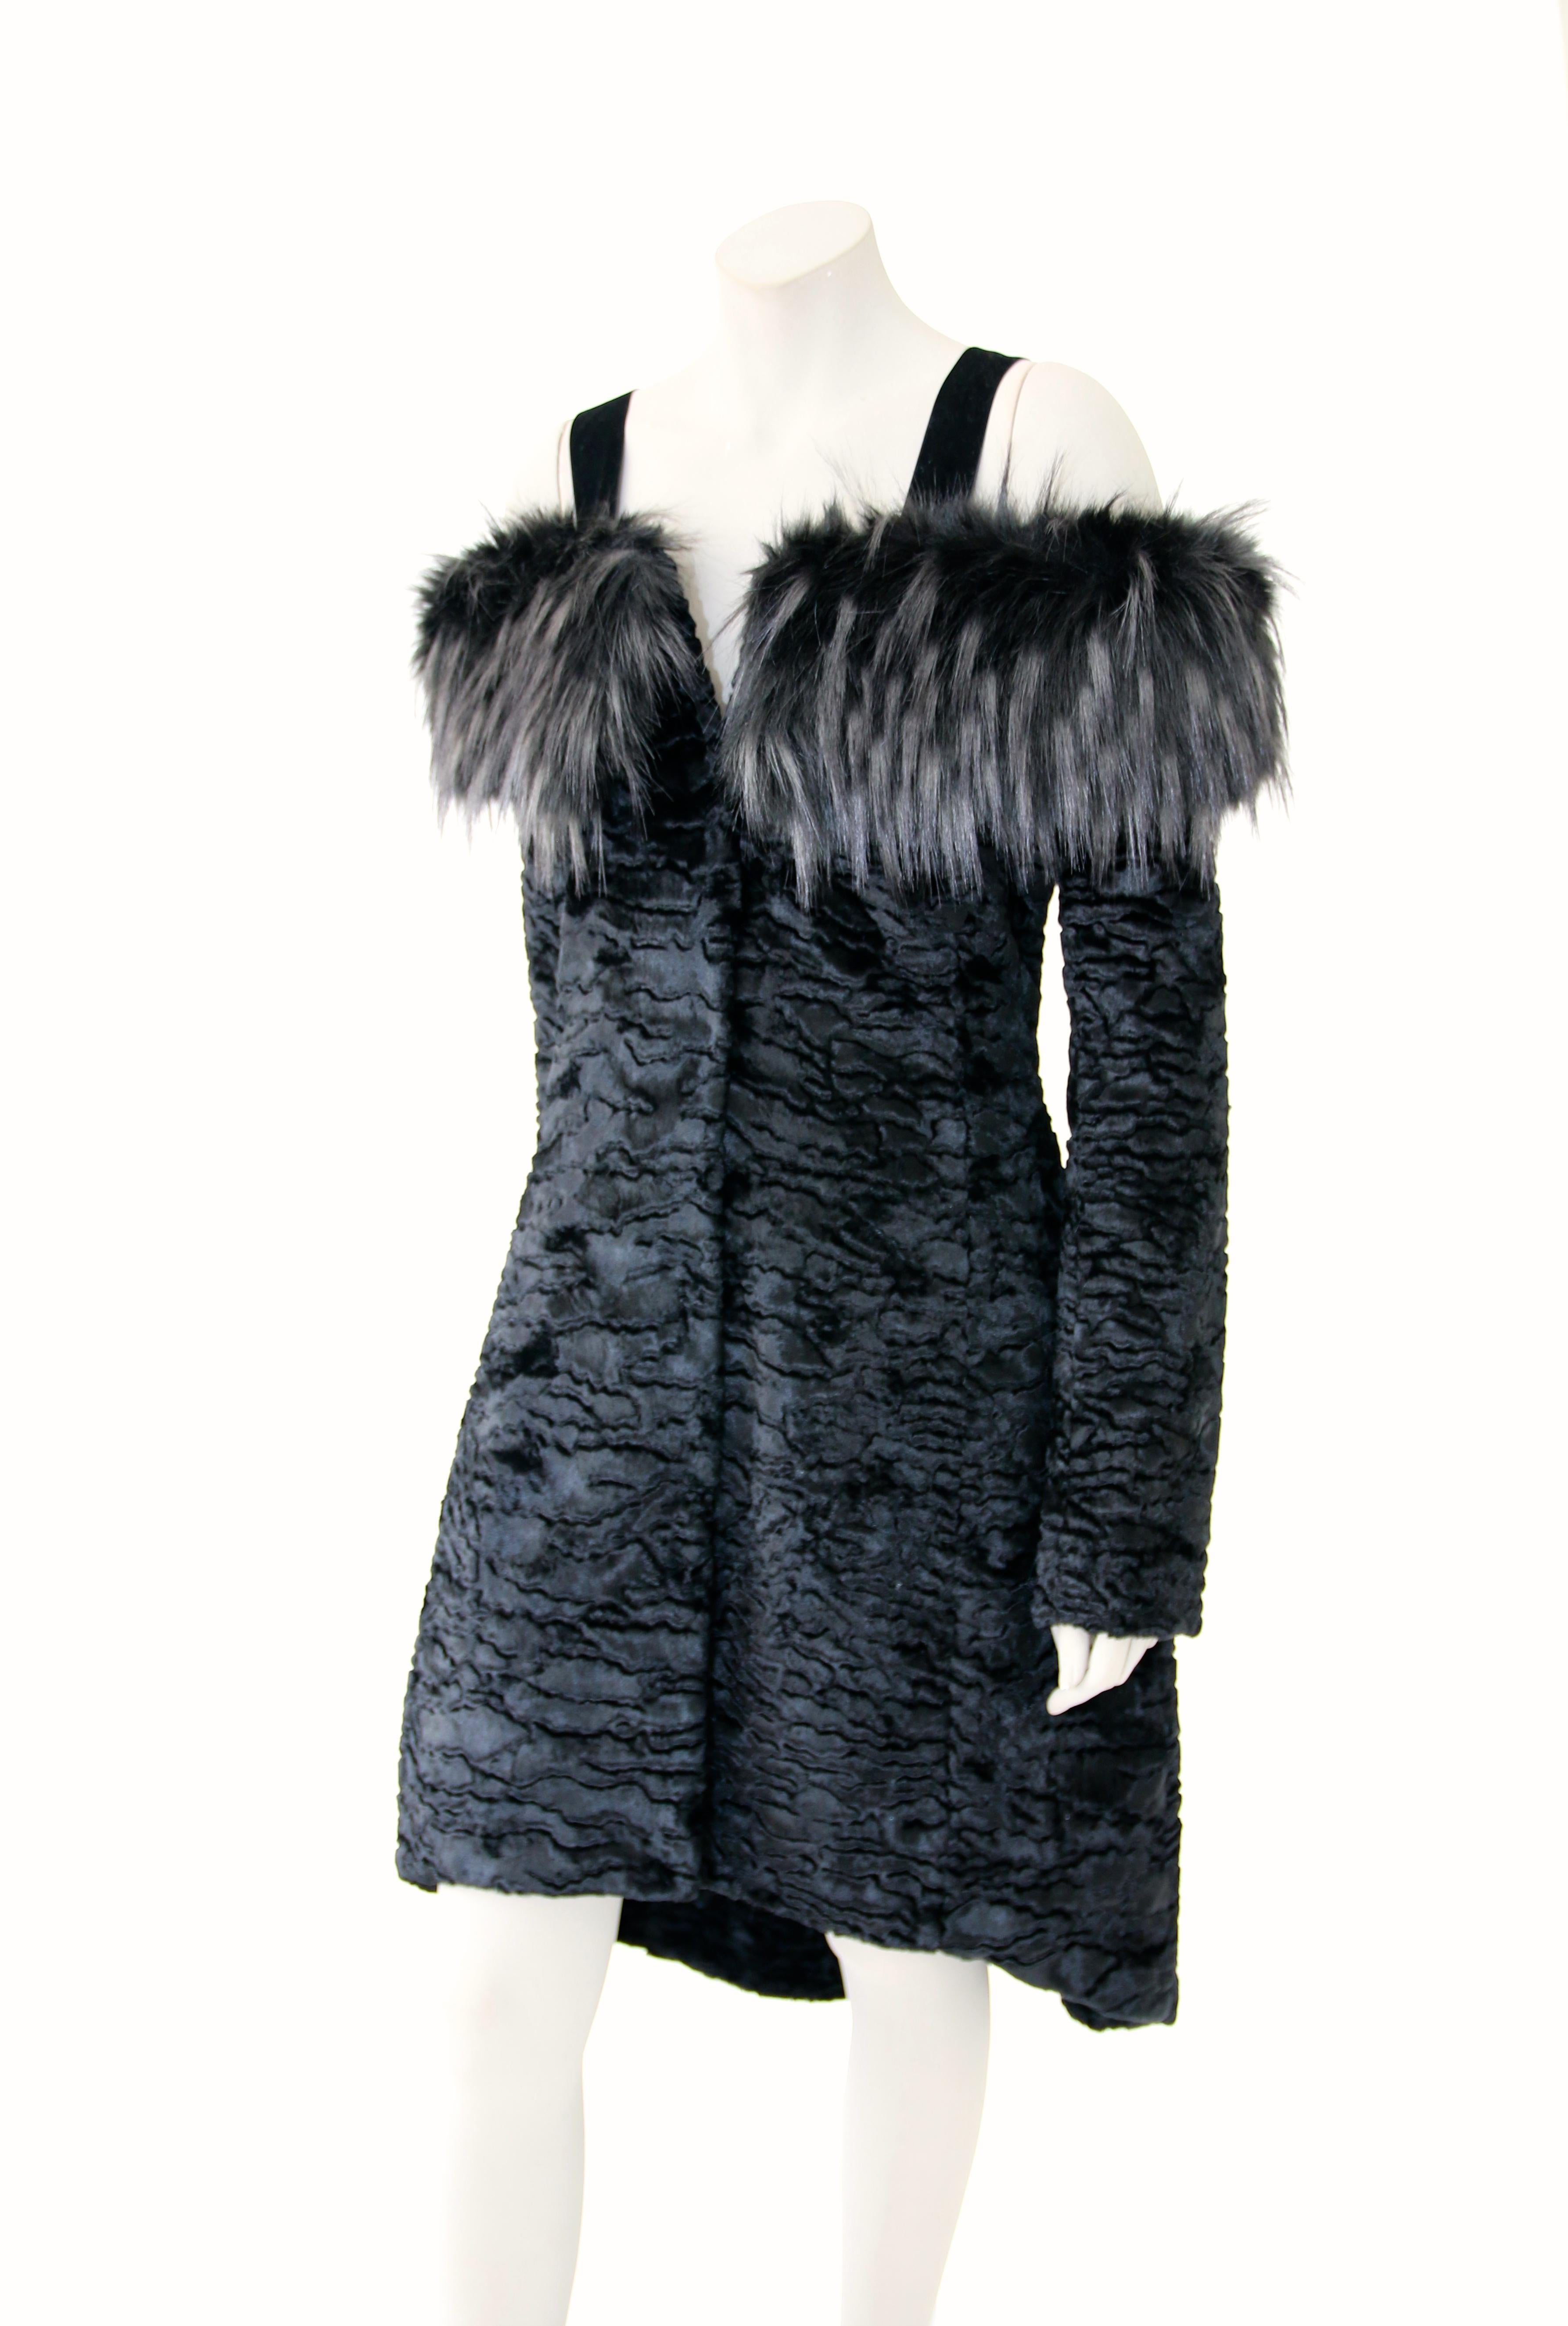 The Isabella Pelush black faux fur Astrakhan coat with tail is a one of a kind exclusive piece. Featuring the highest quality man made pelage, this stylish fake faux fur coat is a beautiful replica of the Astrakhan Karakul Broadtail fur. 